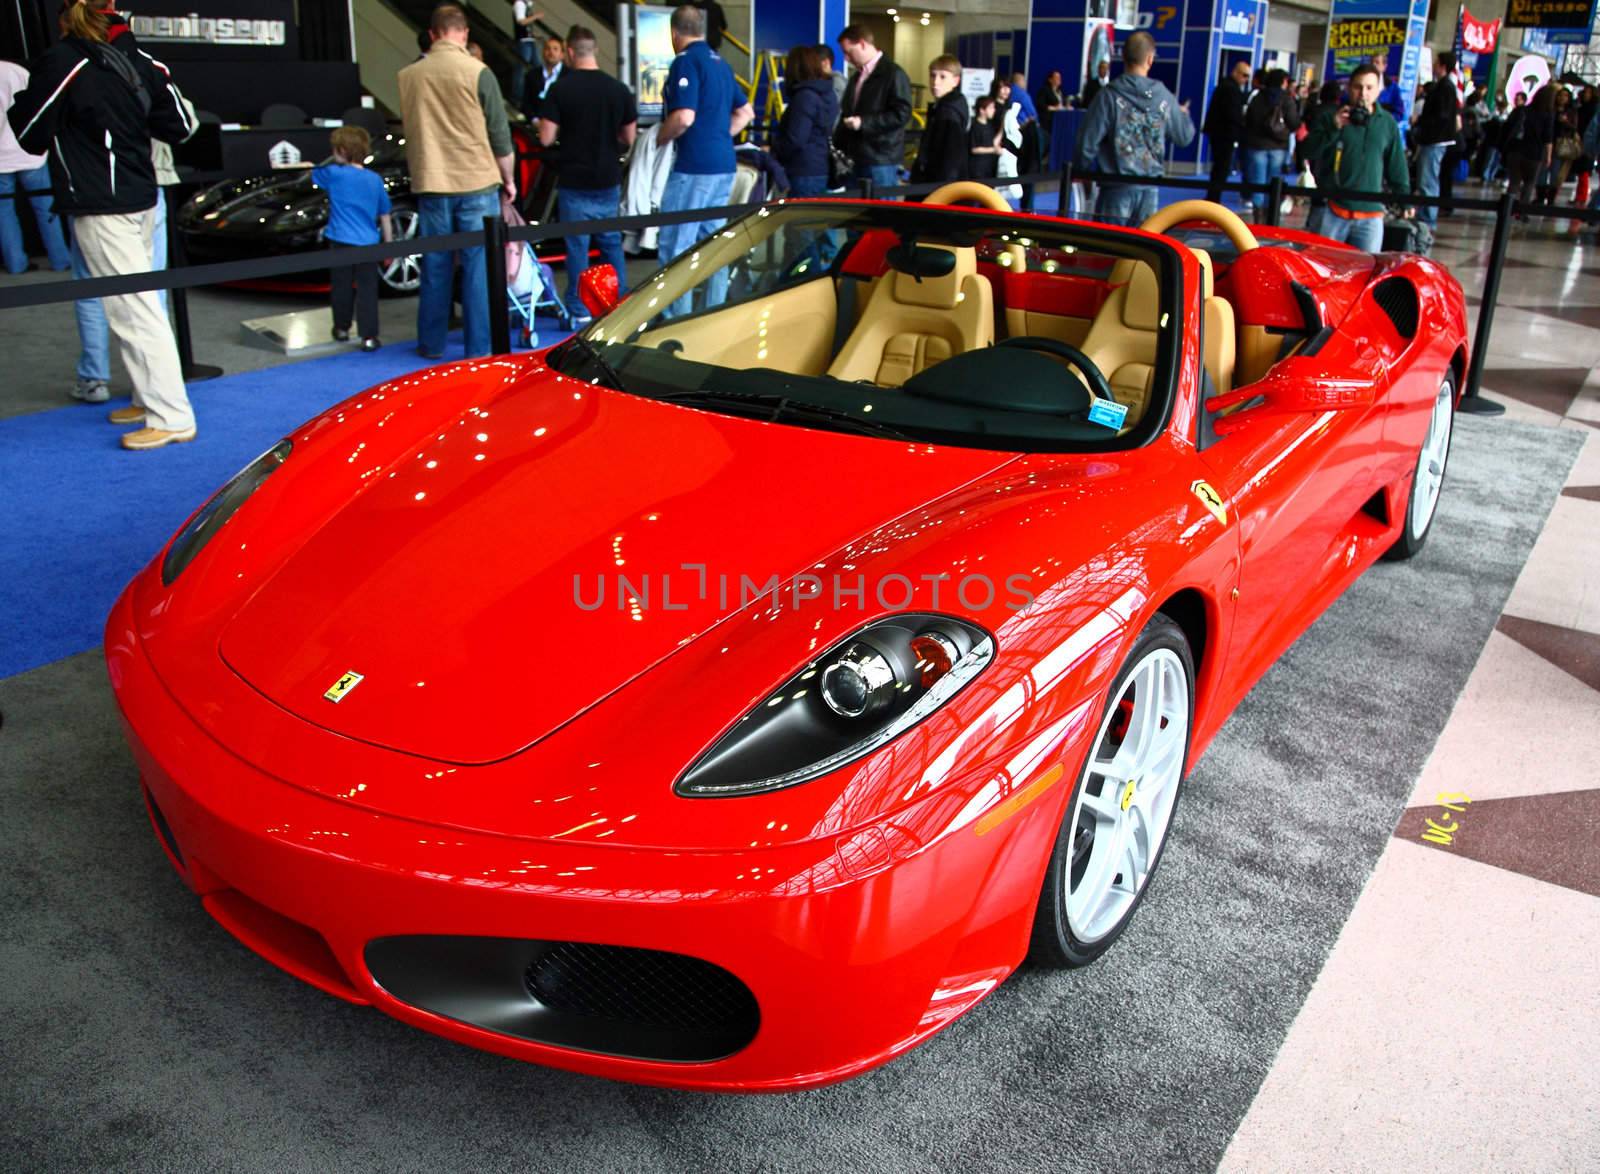 New York City, April 10, 2009: The luxury sport car Ferrari is attracted many visiters at the NY International Auto Show 2009. 